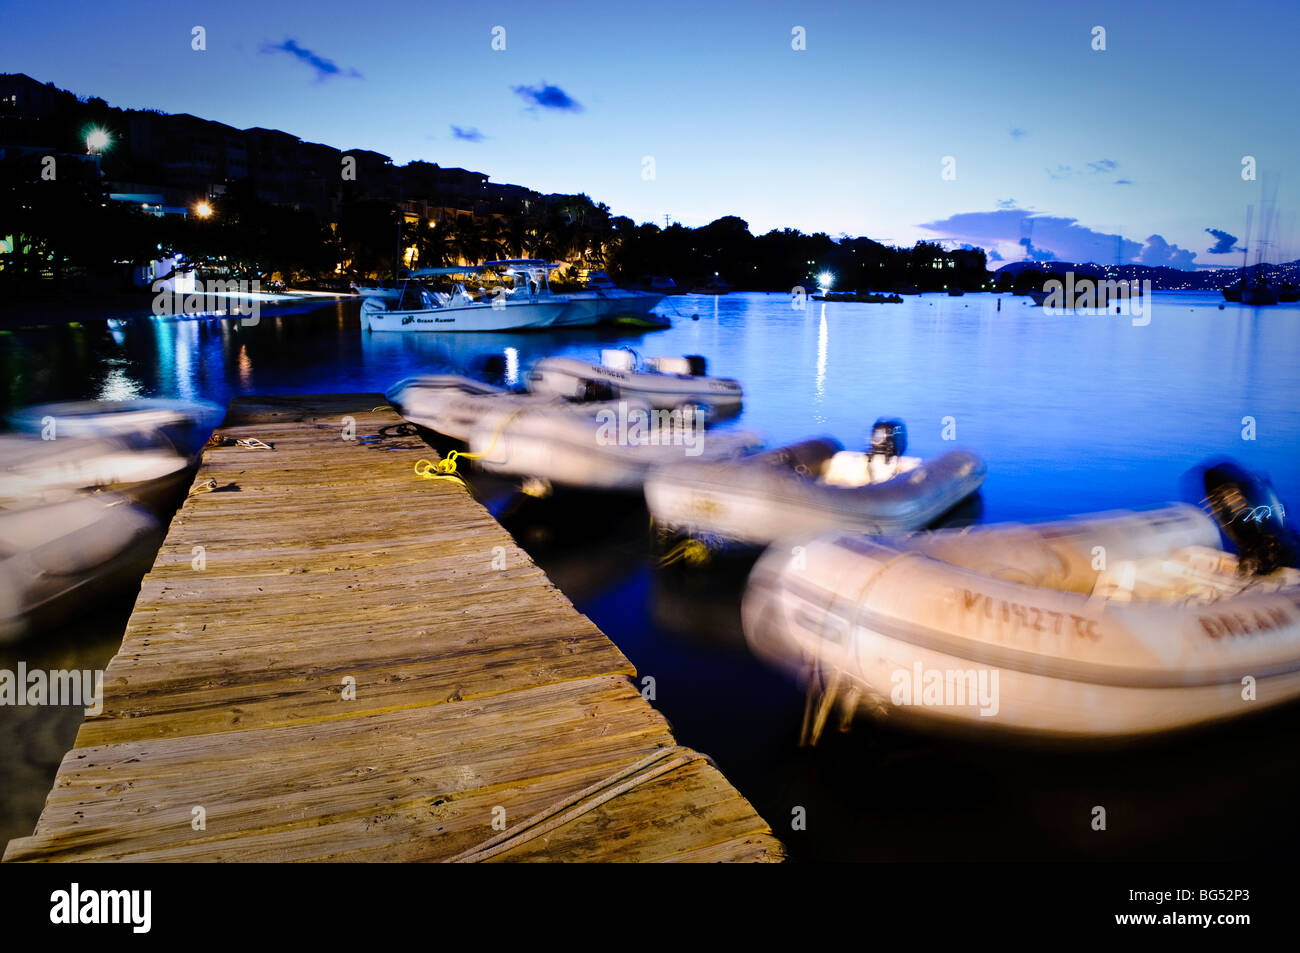 ST JOHN, US Virgin Islands - Pier of Cruz Bay Harbor on the Caribbean island of St John in the US Virgin Islands at dusk with motion blur of boats Stock Photo